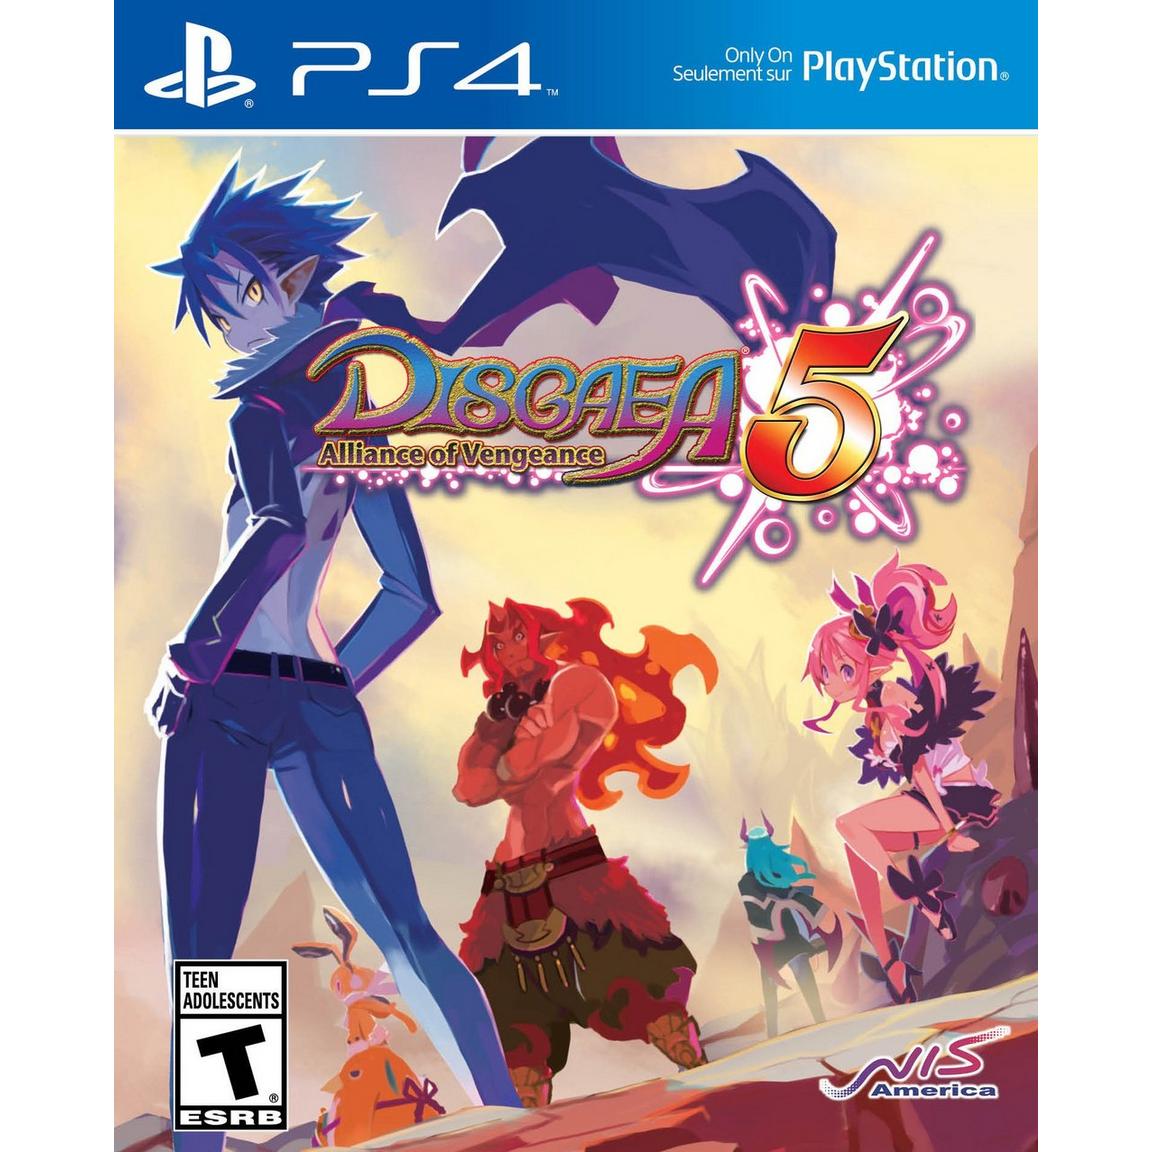 Disgaea 5: Alliance of Vengeance - PlayStation 4, Pre-Owned